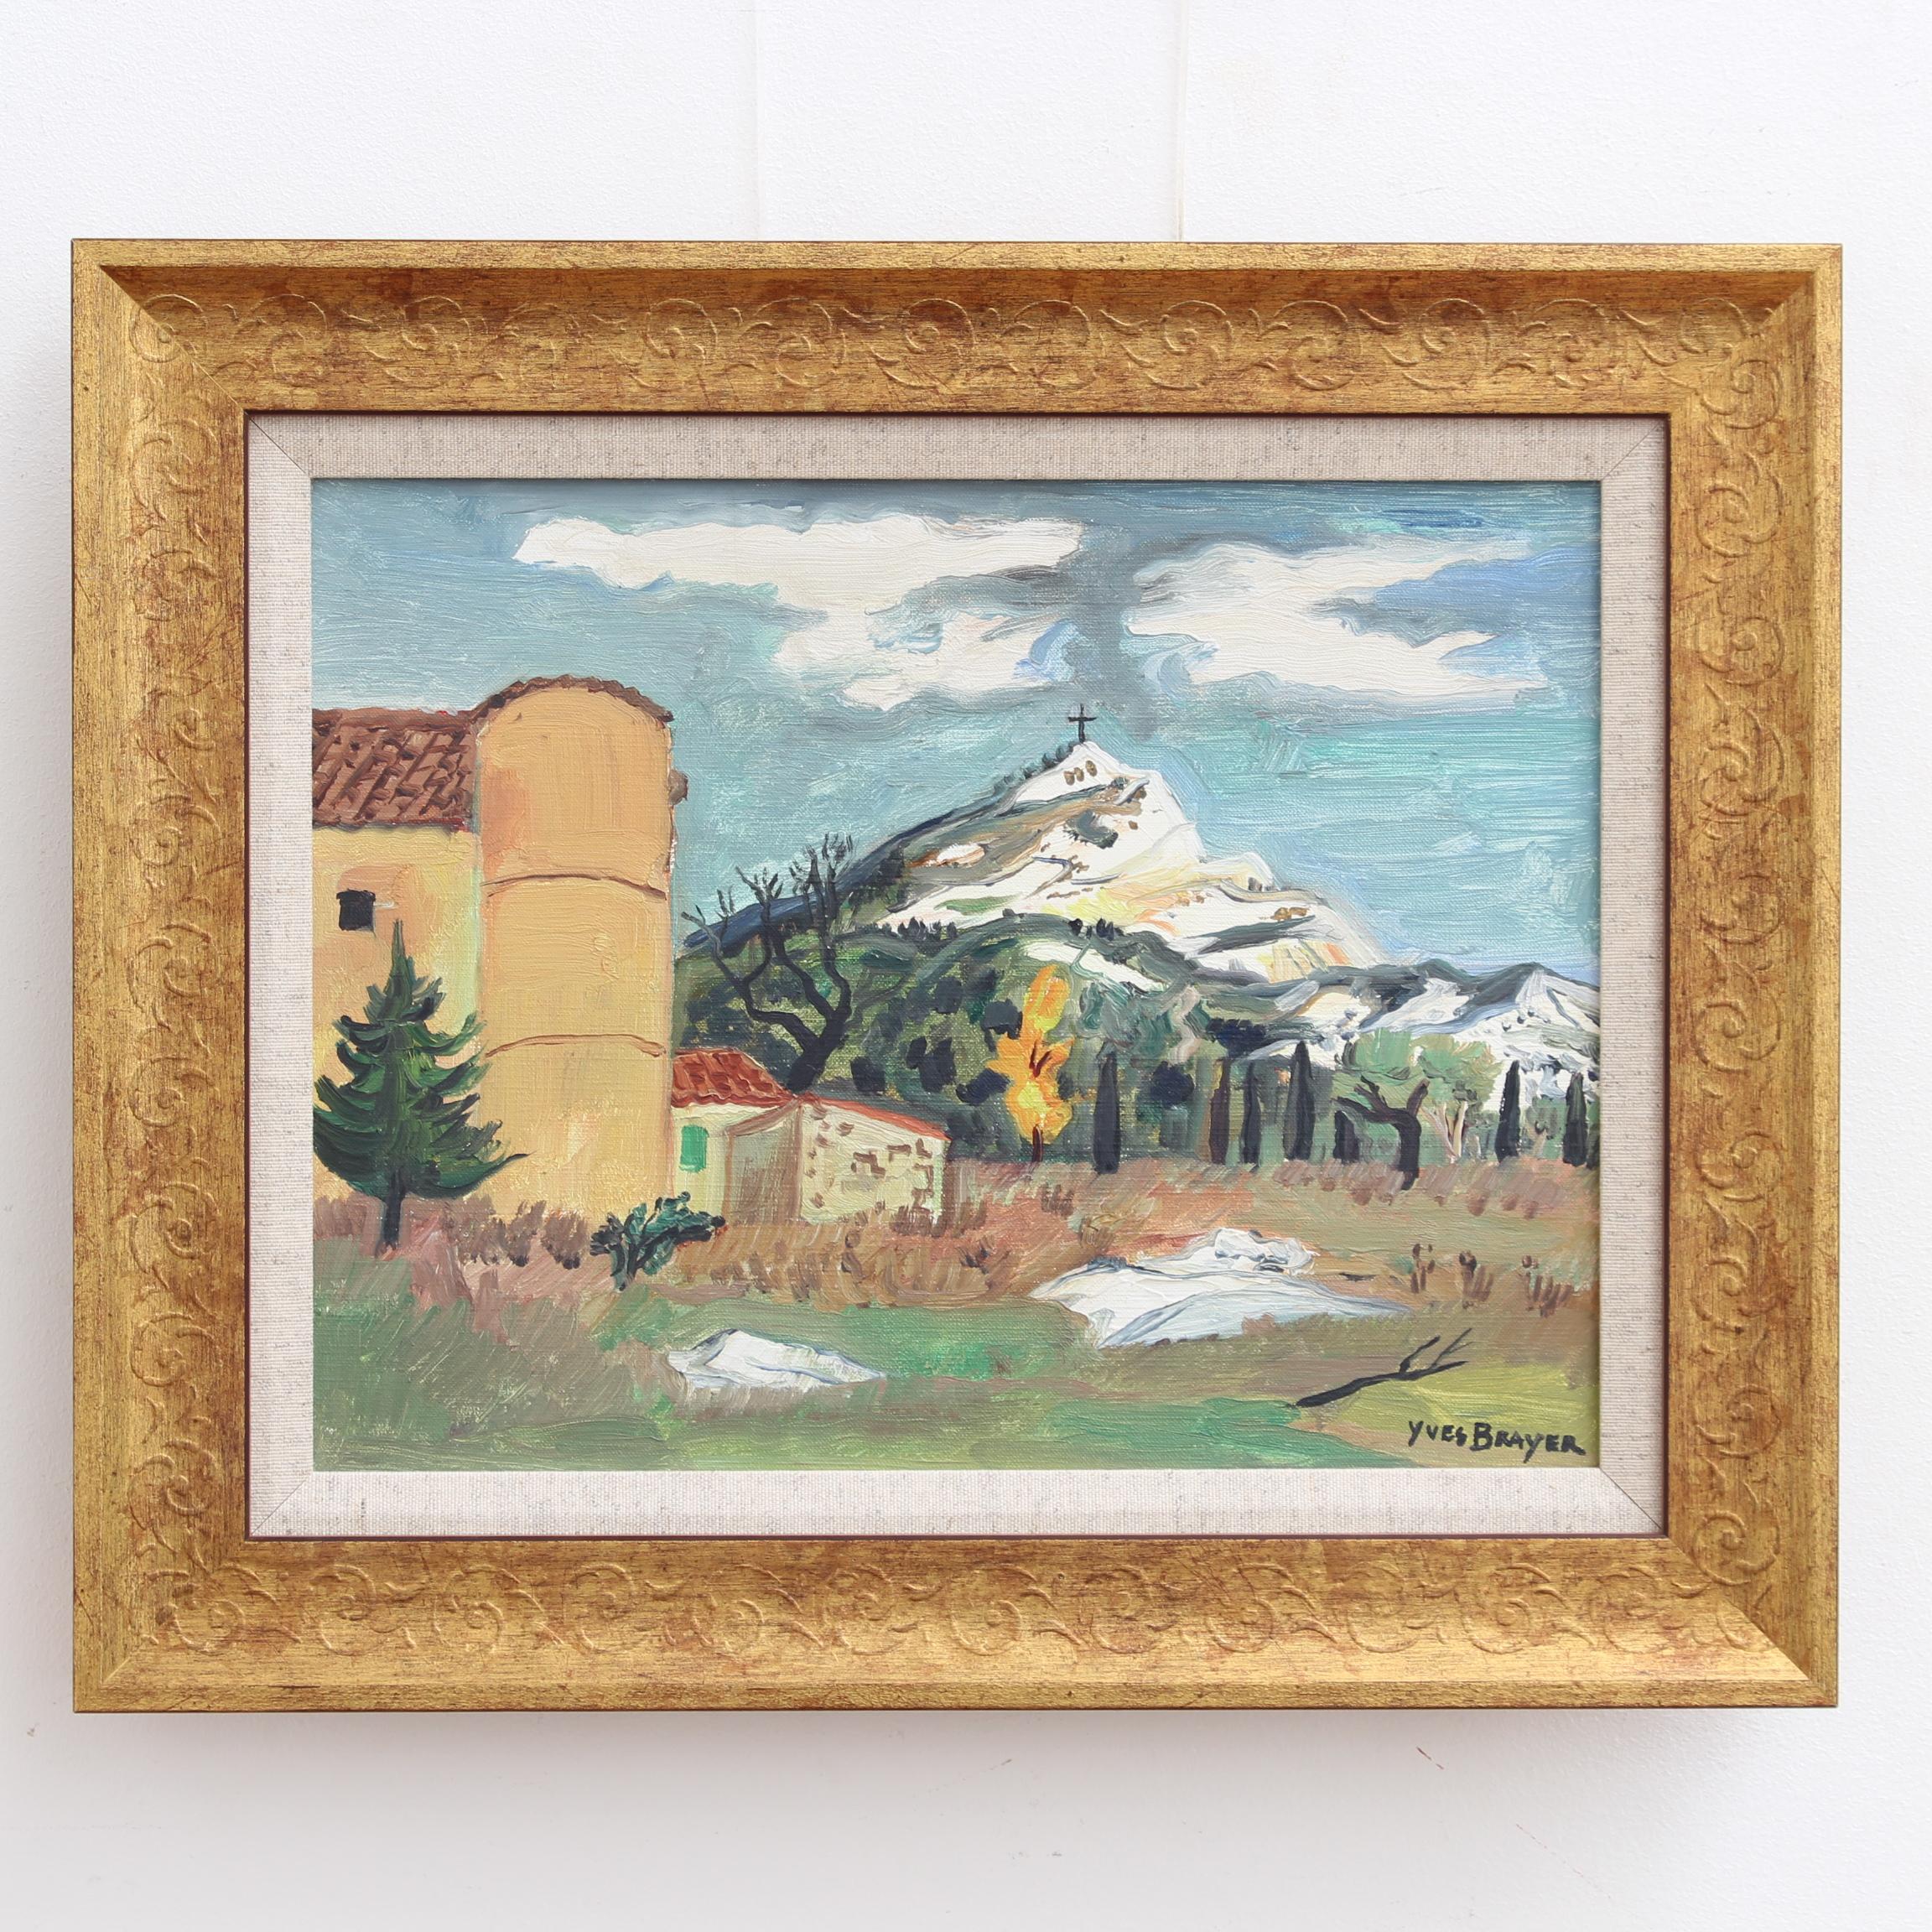 'Mont Sainte-Victoire', oil on canvas, by Yves Brayer (circa 1960s). For Cezanne (1839-1906), his famous works depicting Sainte-Victoire Mountain were an ongoing study and a constant reflection on how landscape could be described. In his later